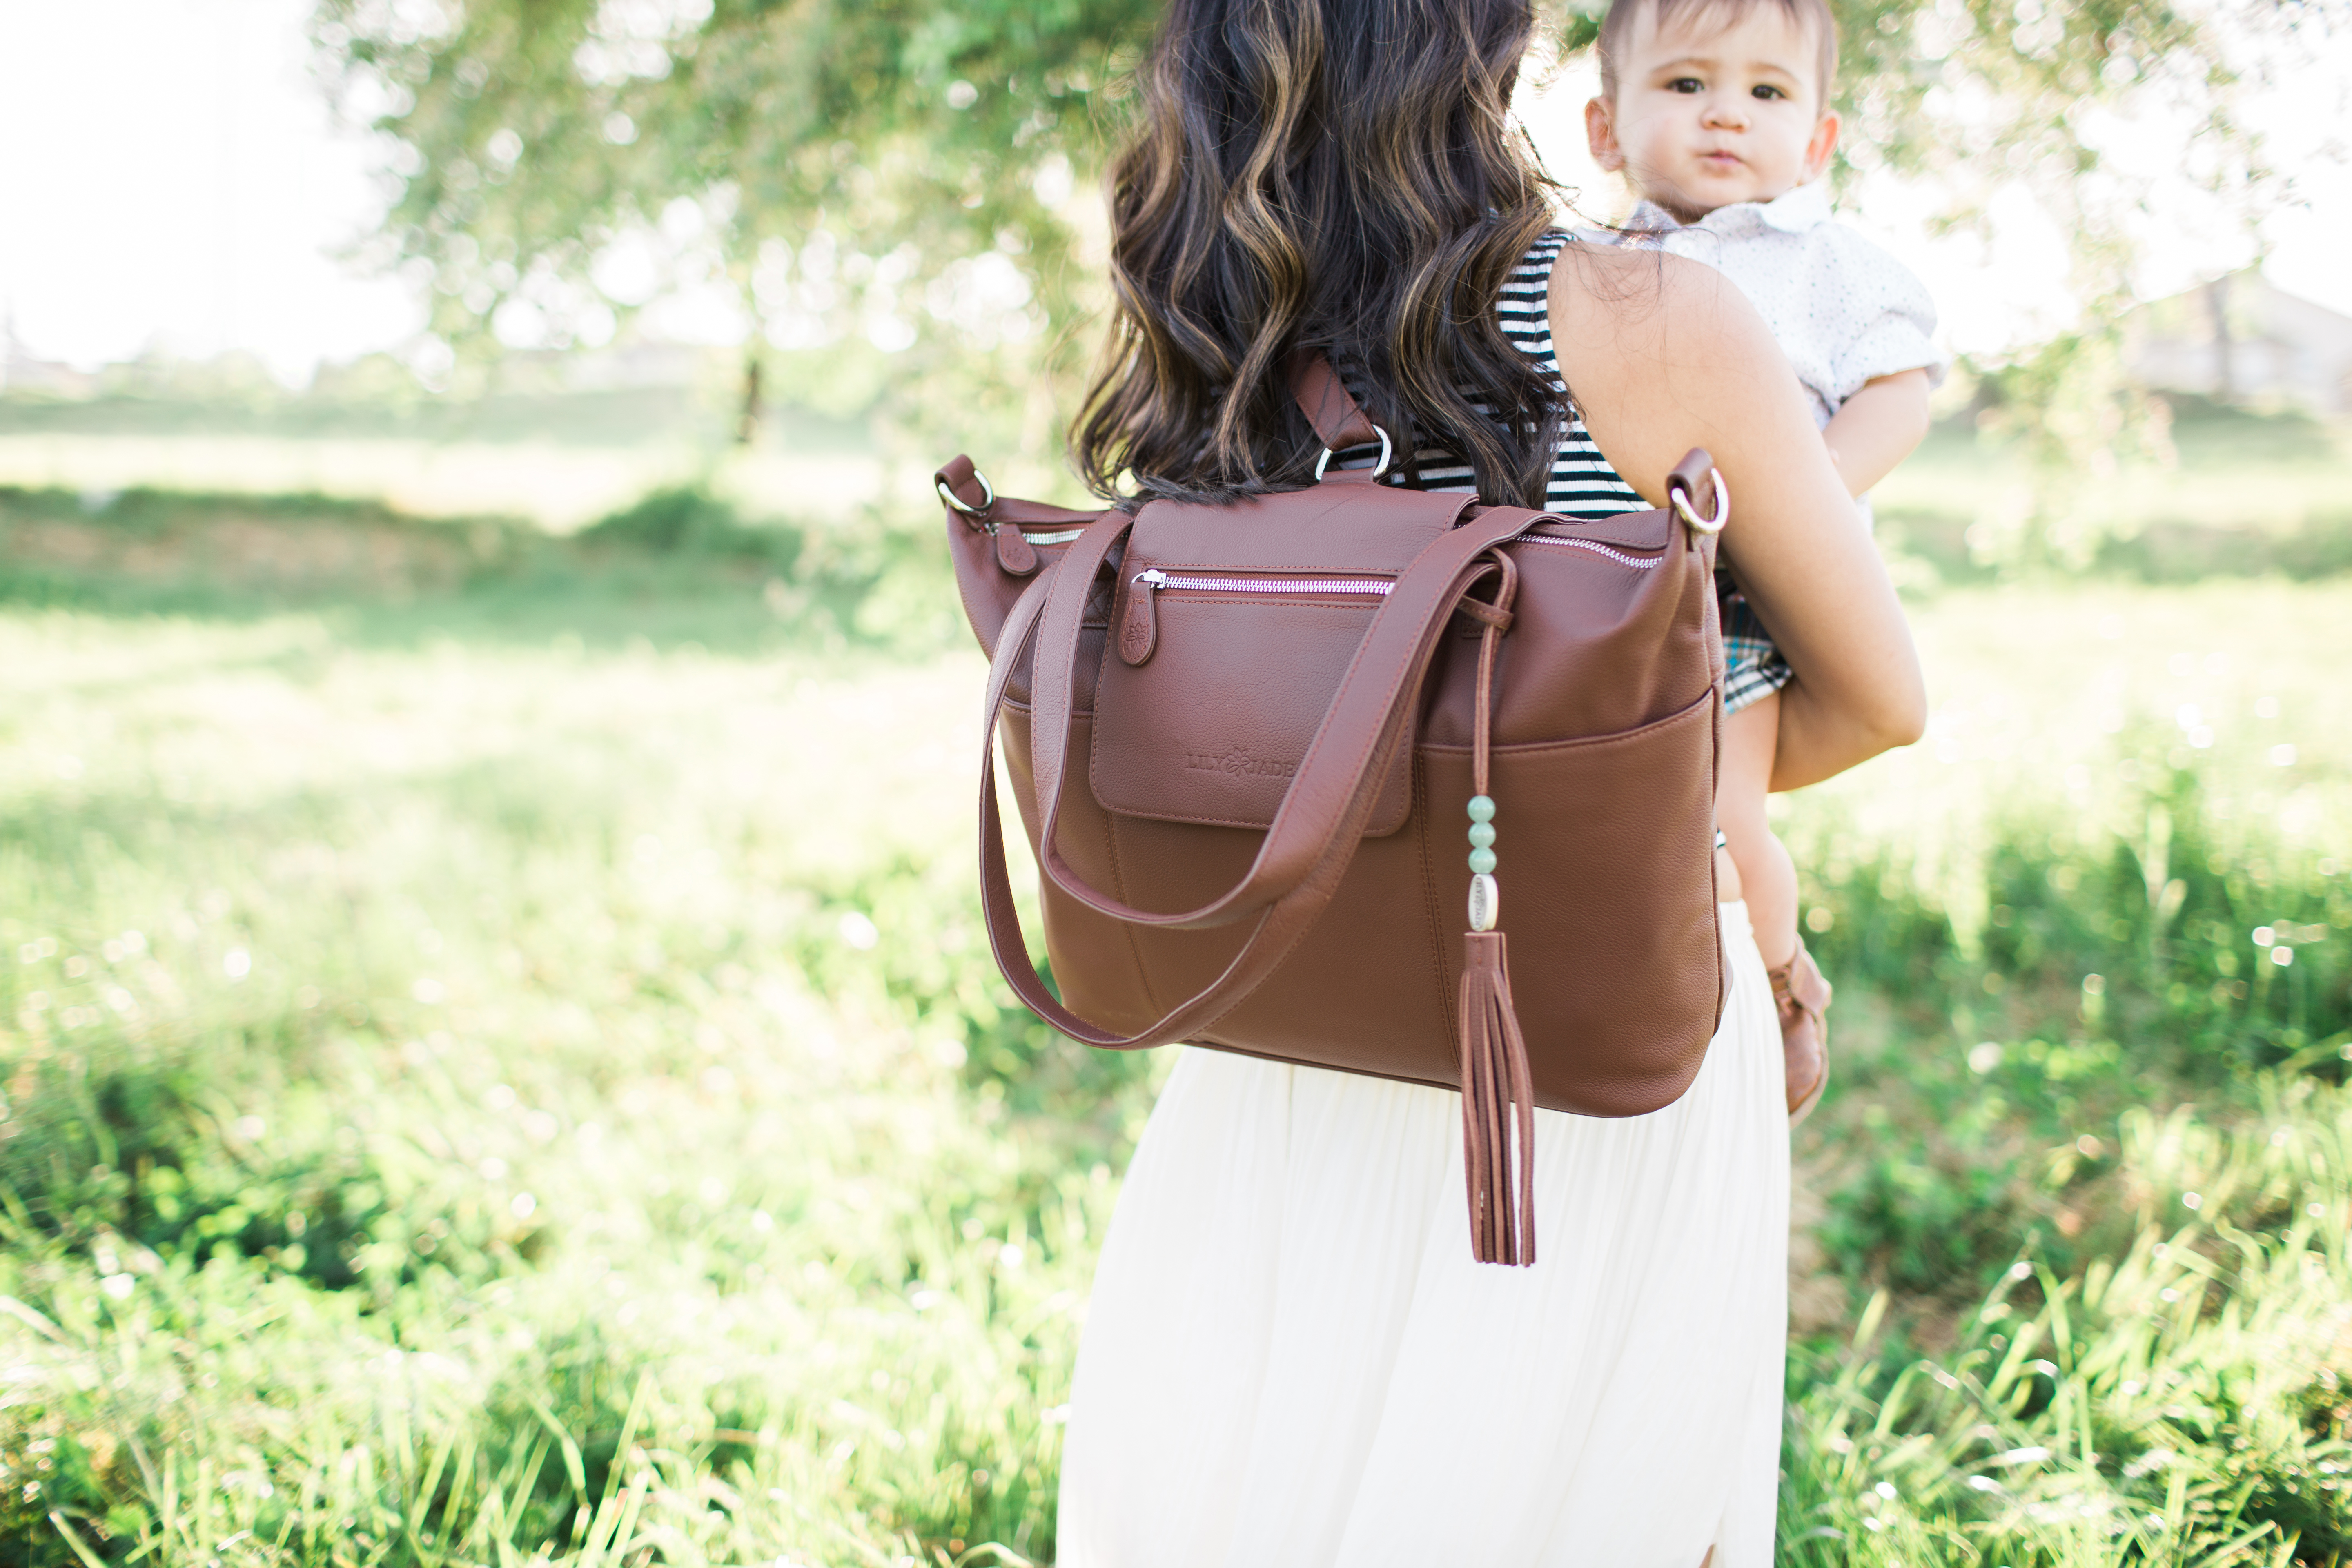 Summer Style: Lily Jade Diaper Bags (Giveaway)